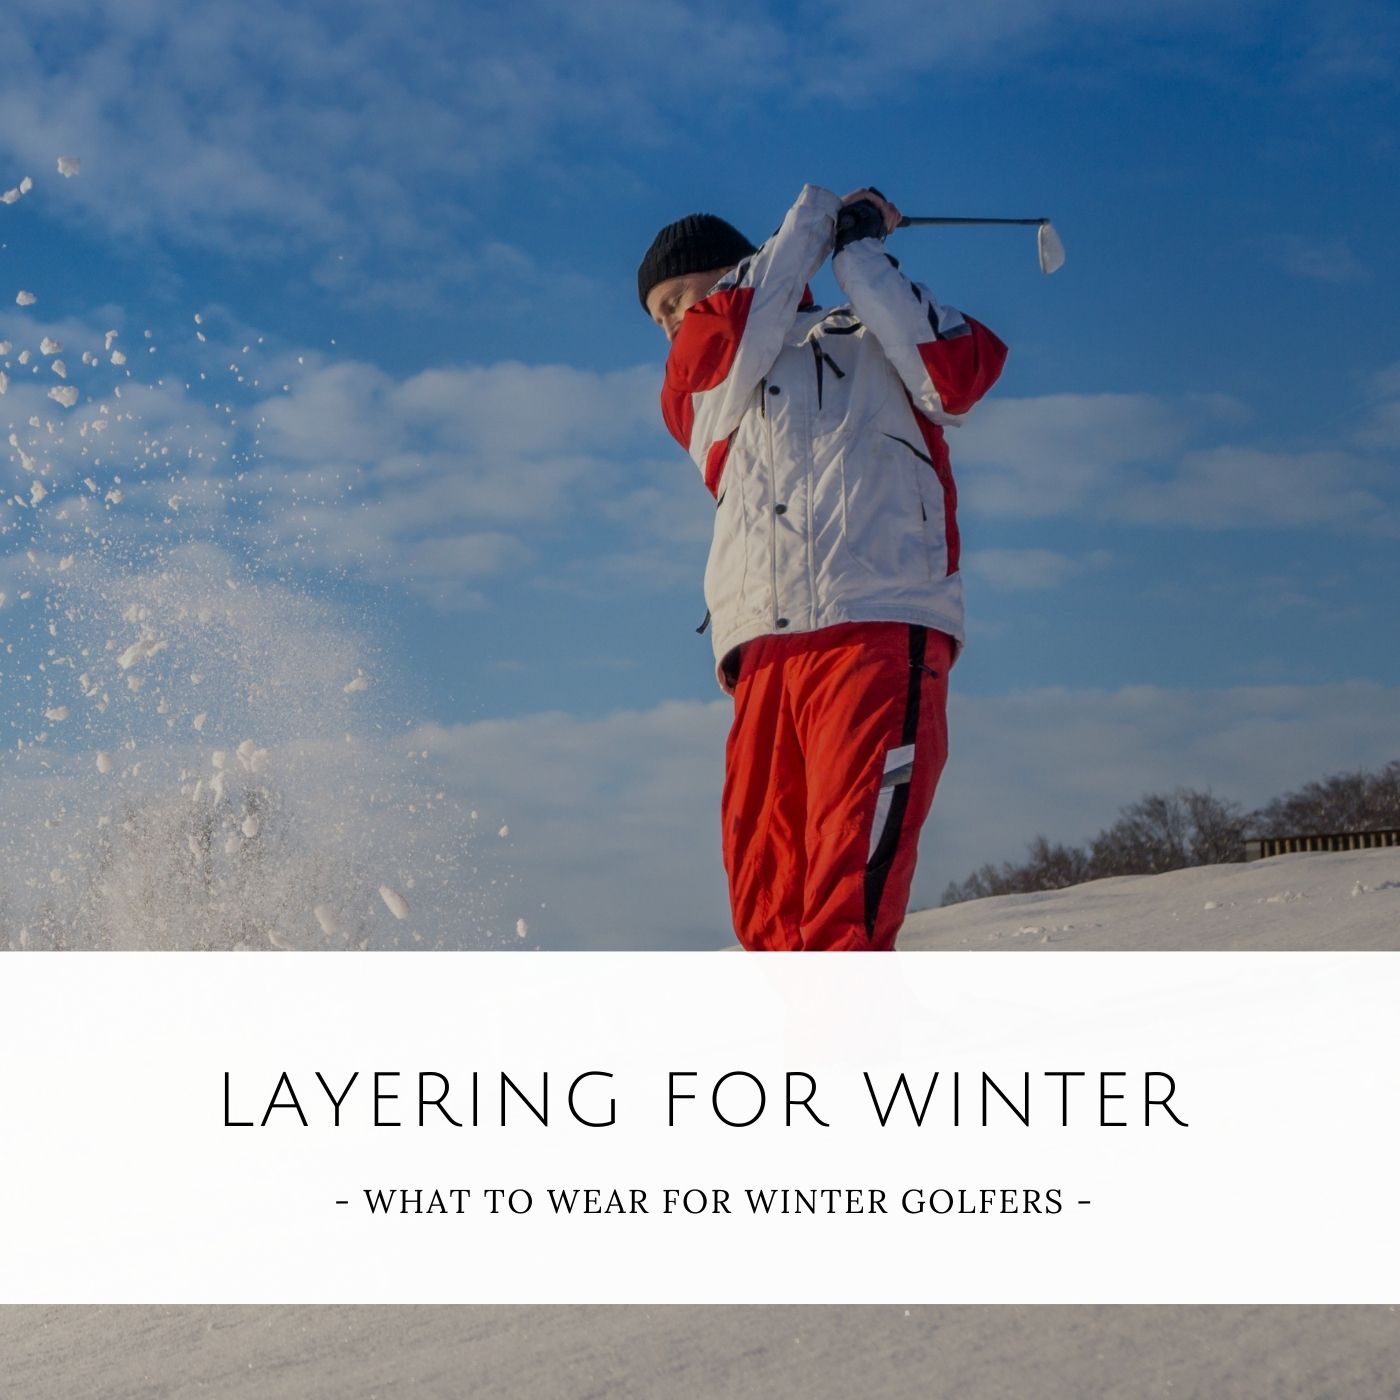 Winter wear clothing in layers for winter golf players